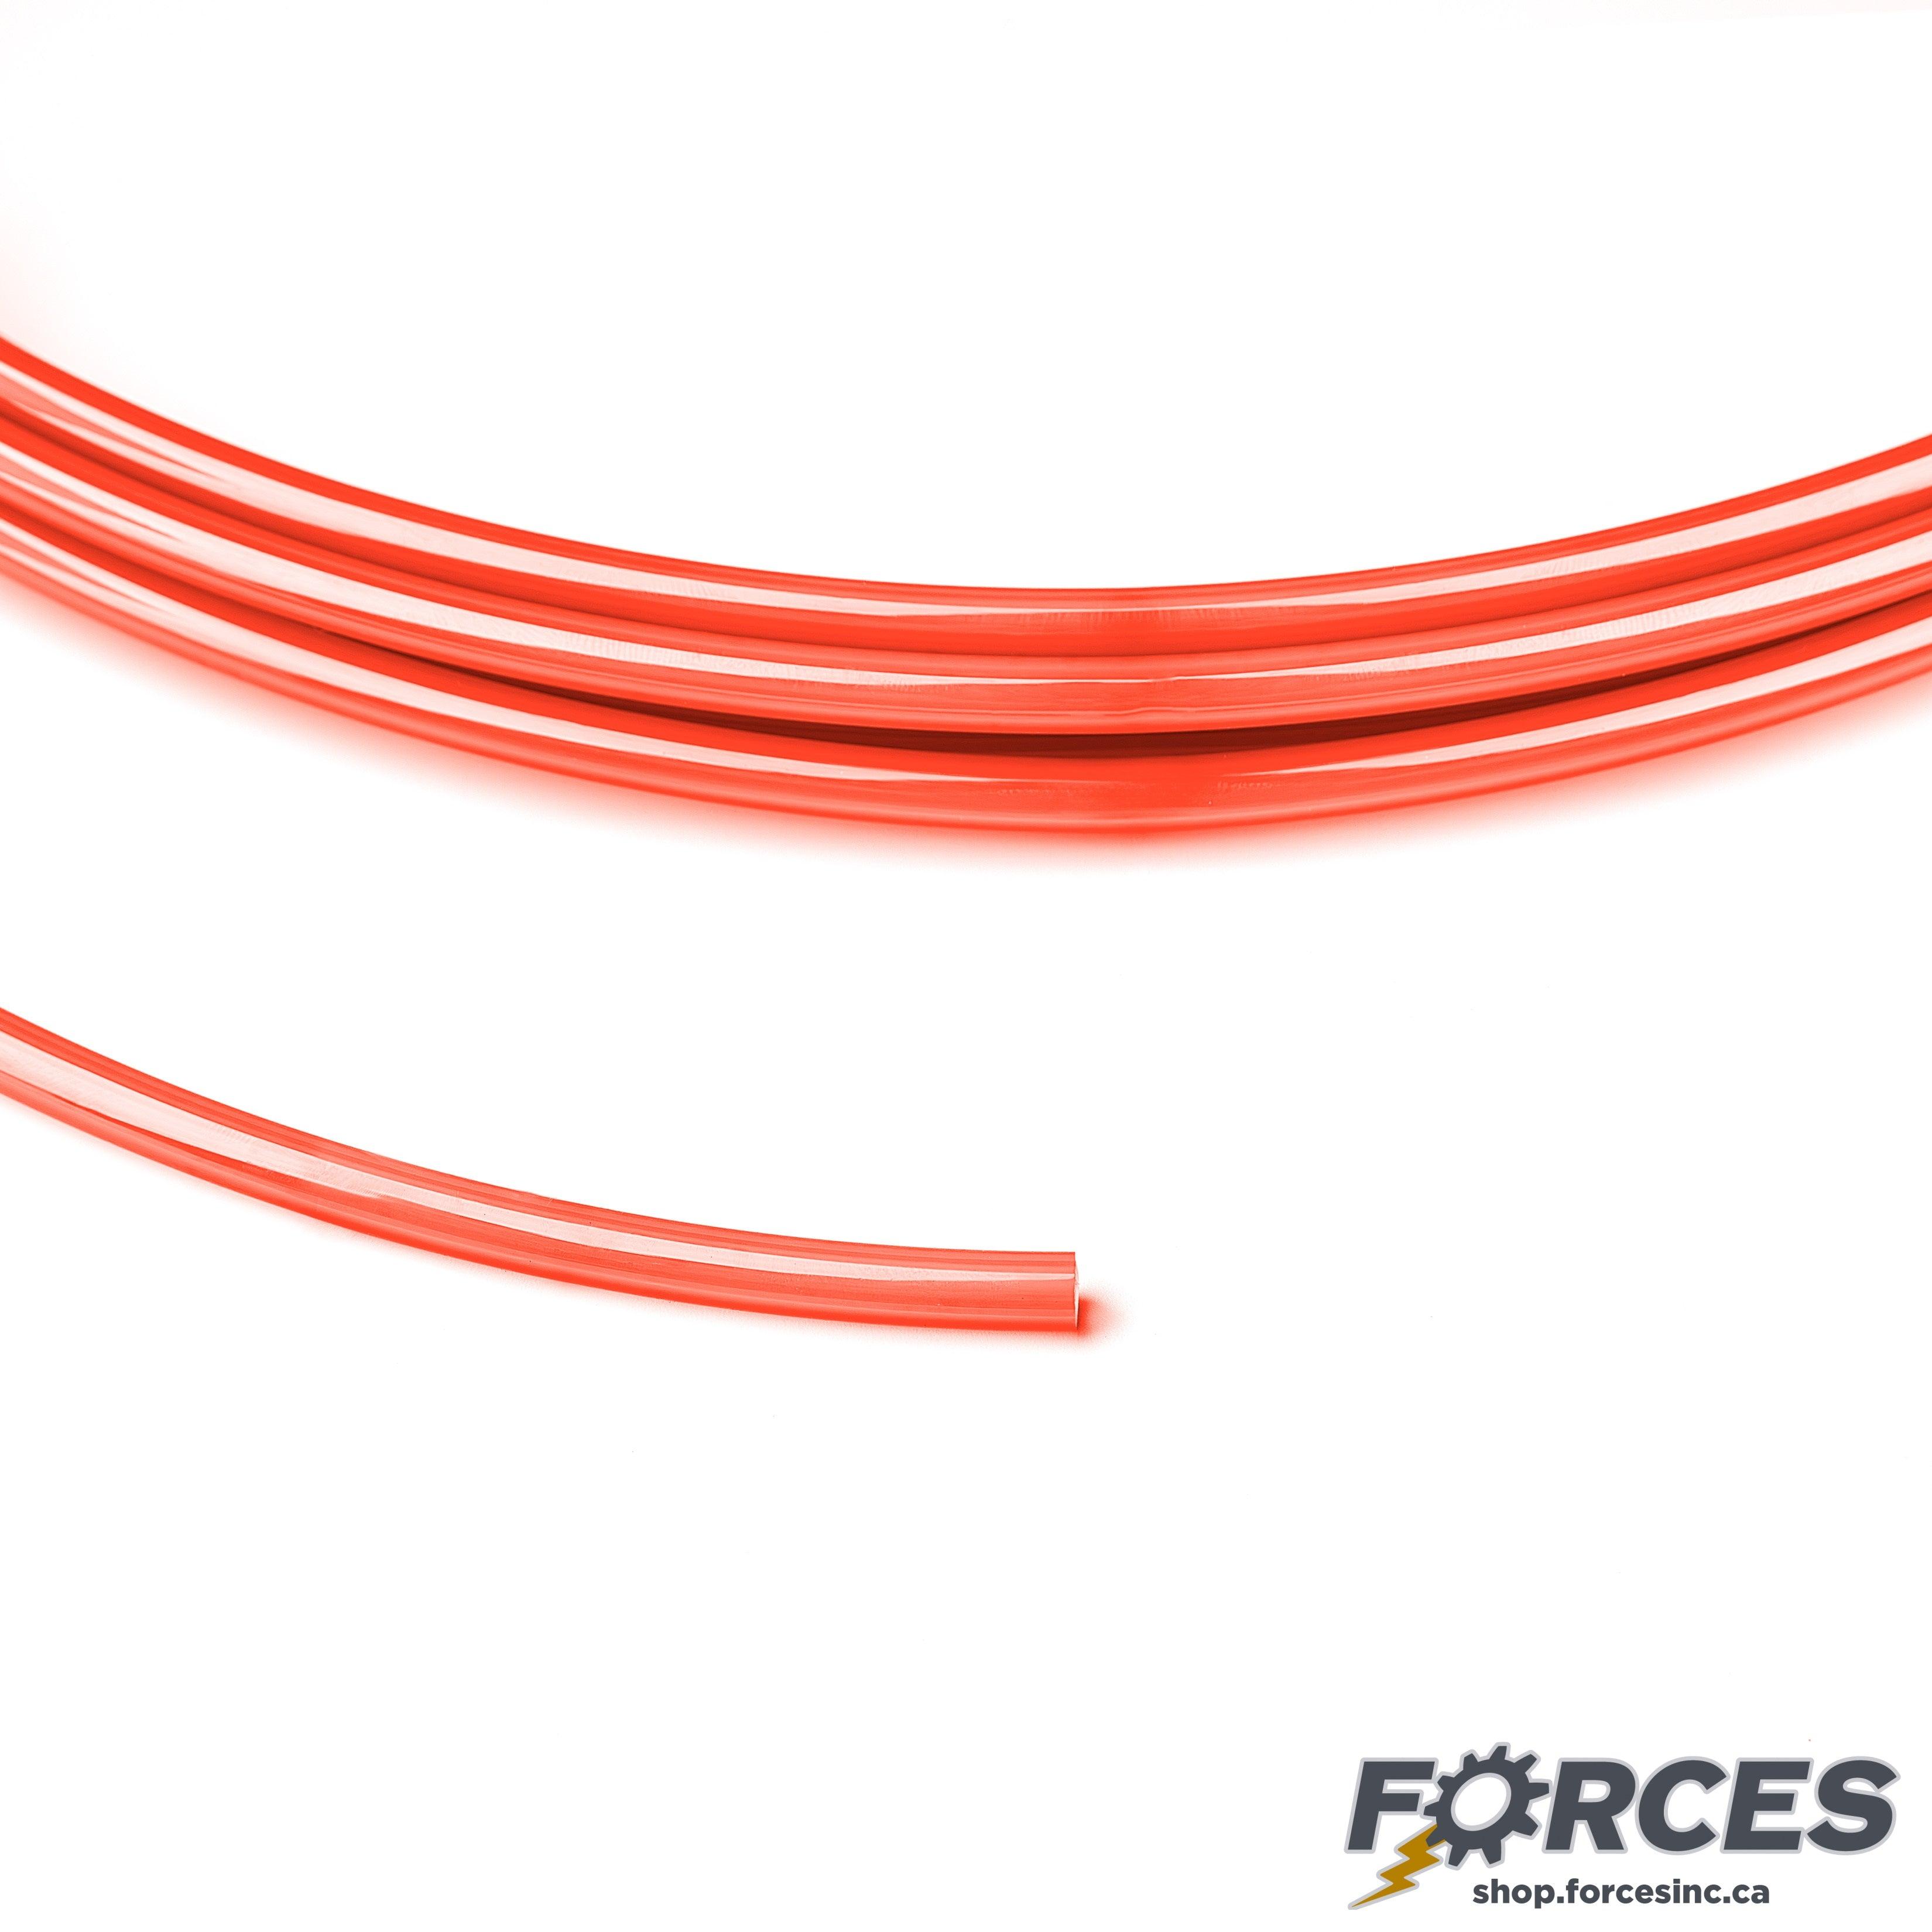 Pneumatic Air Tubing 1/4" x 4.2mm Red Polyurethane - 330ft - Forces Inc